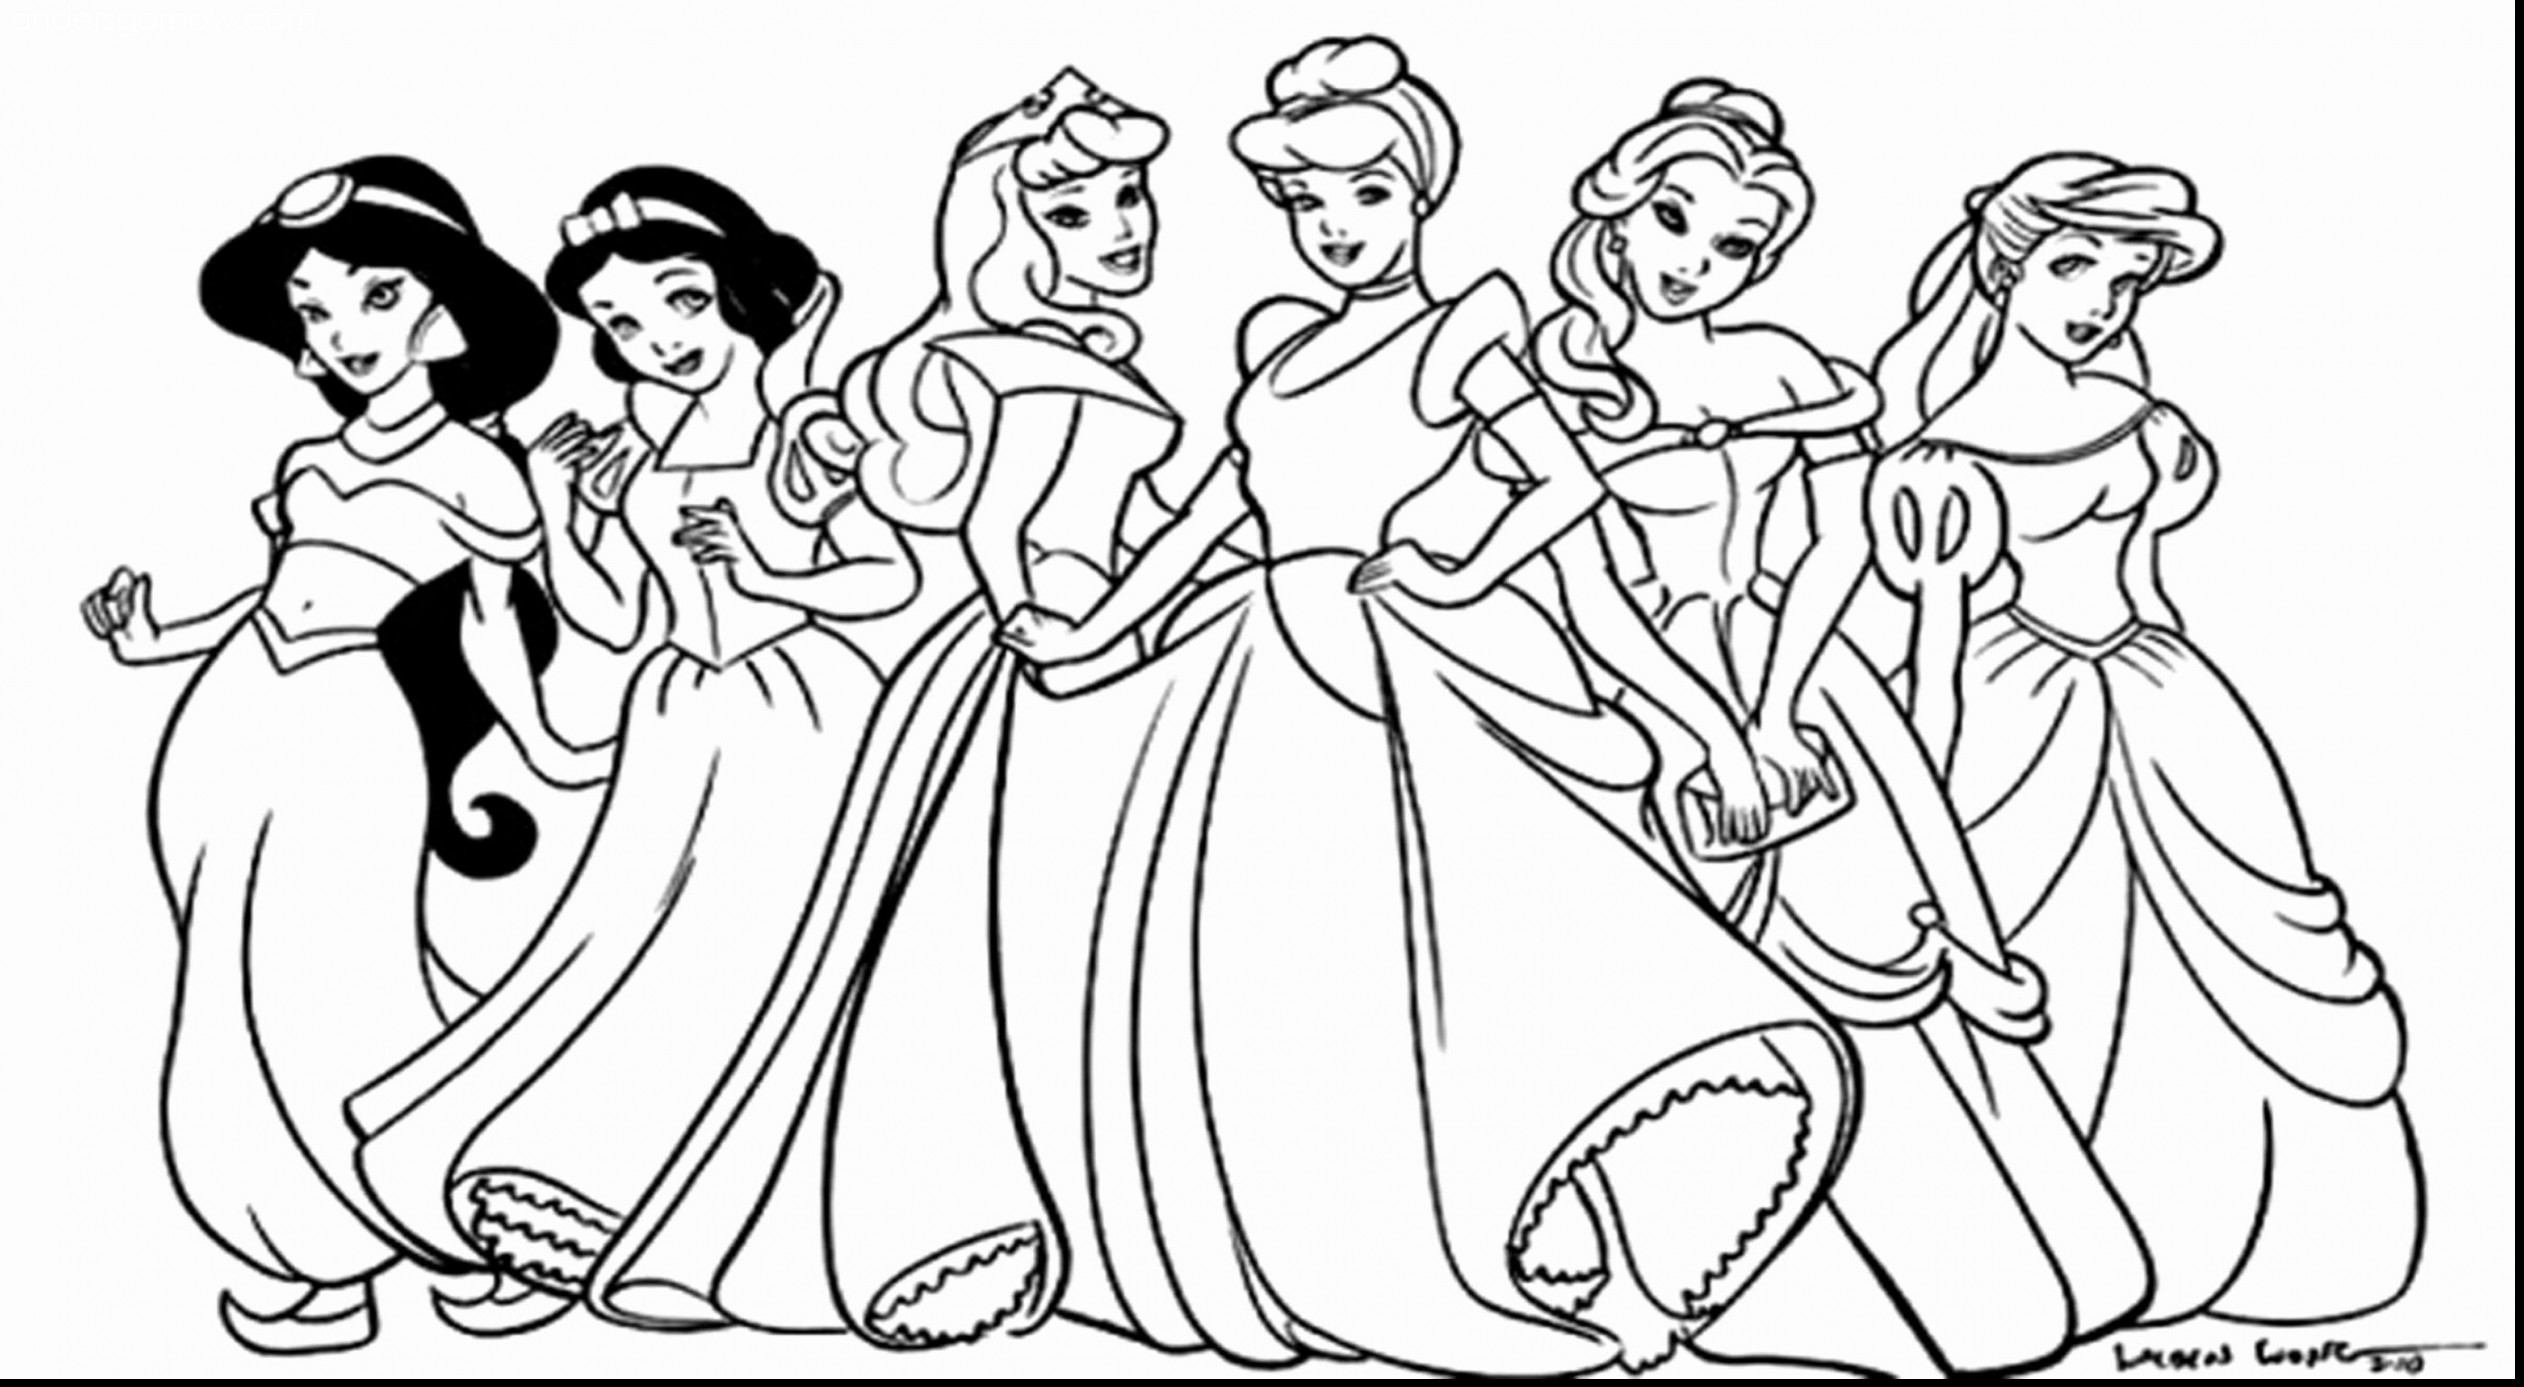 Coloring Pages Princess Pdf – From the thousands of photographs on